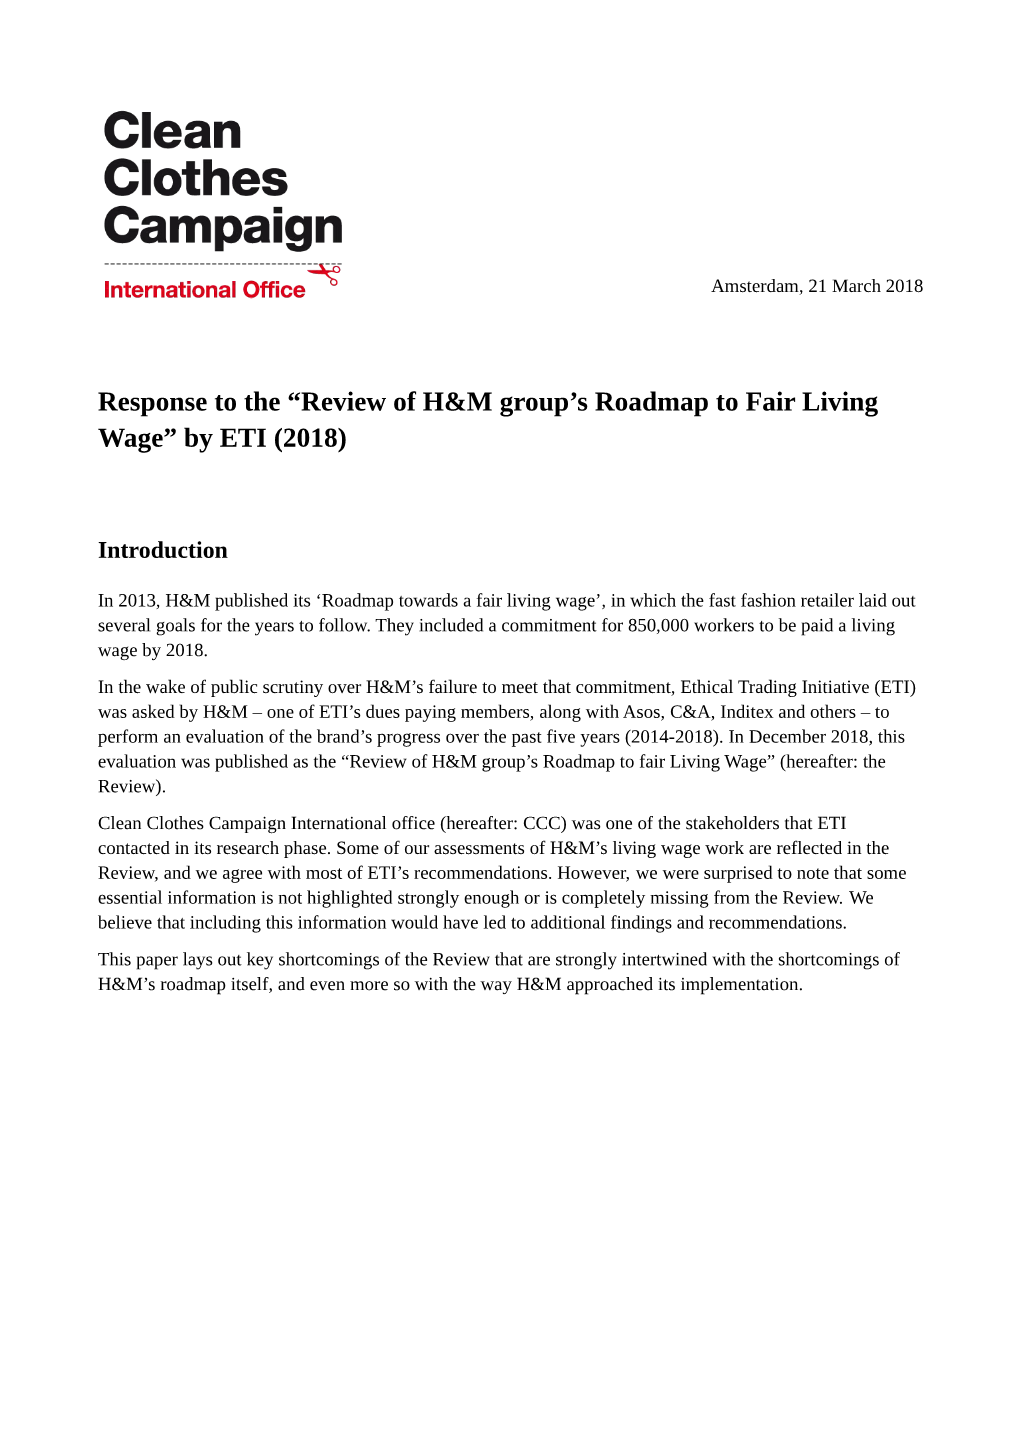 Review of H&M Group's Roadmap to Fair Living Wage